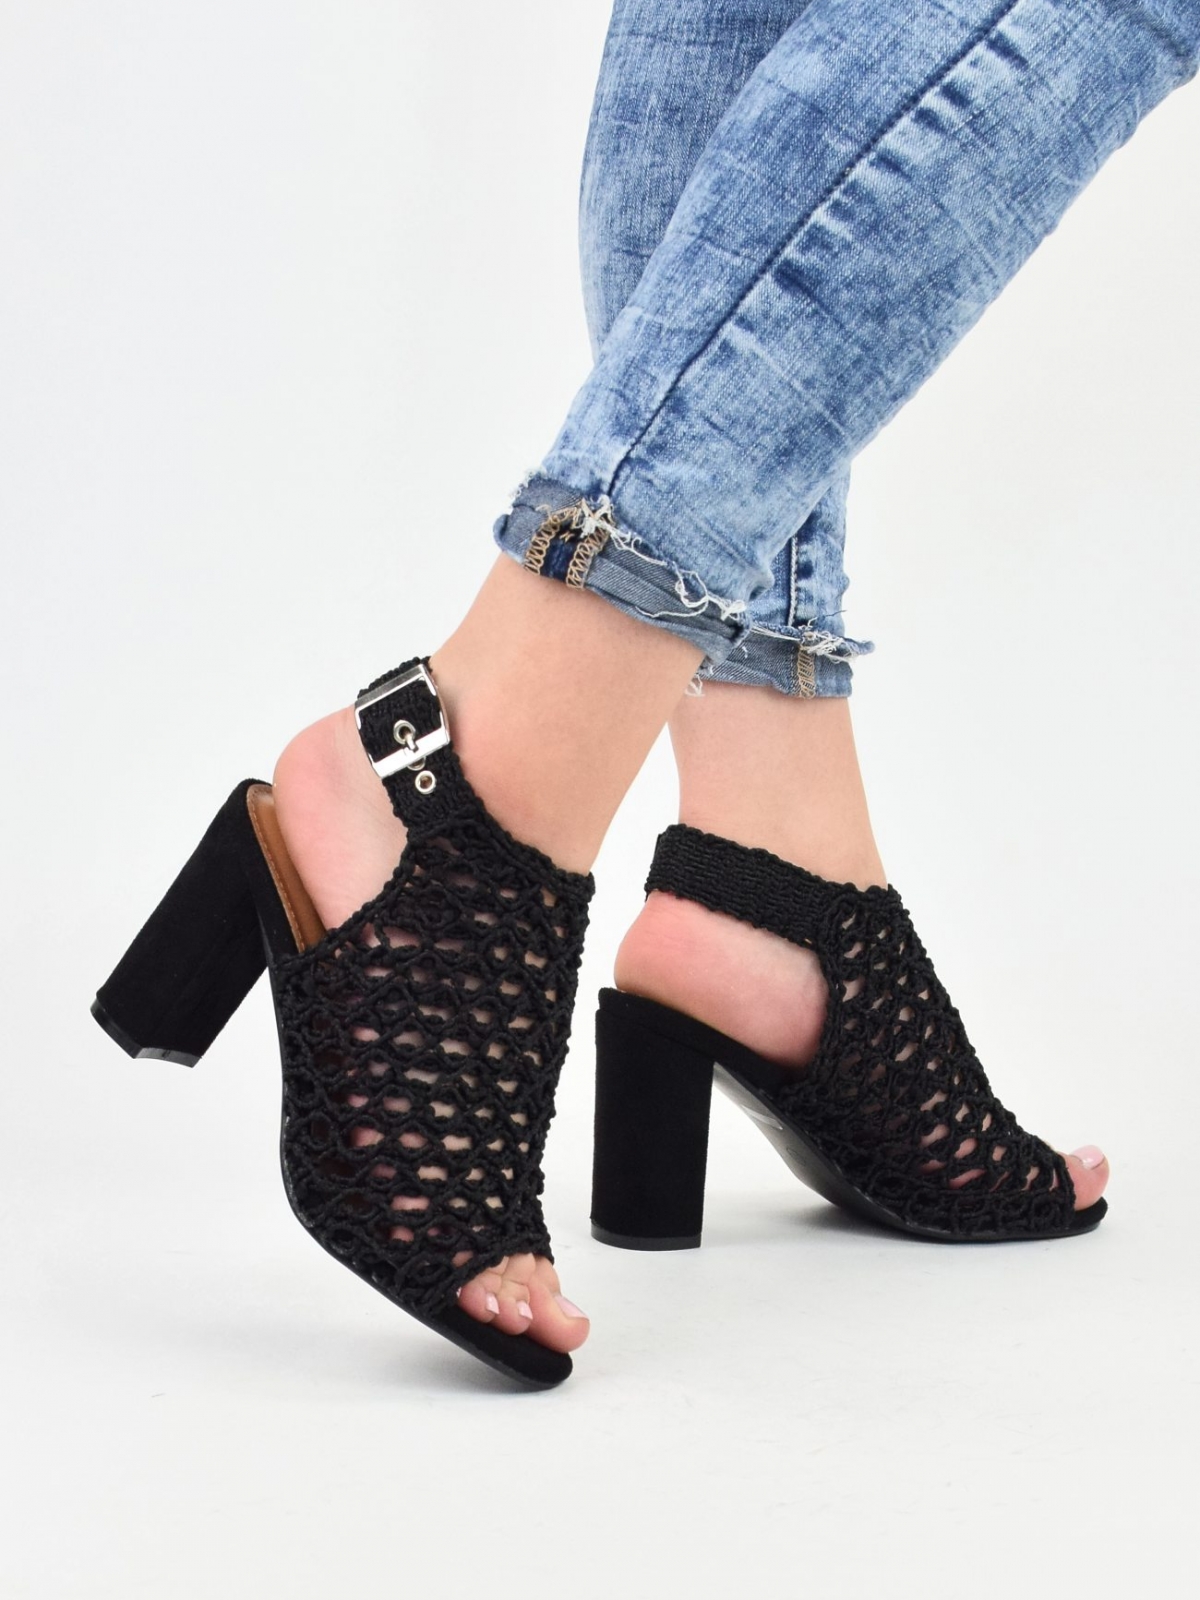 Knitted open-toed sandals in black